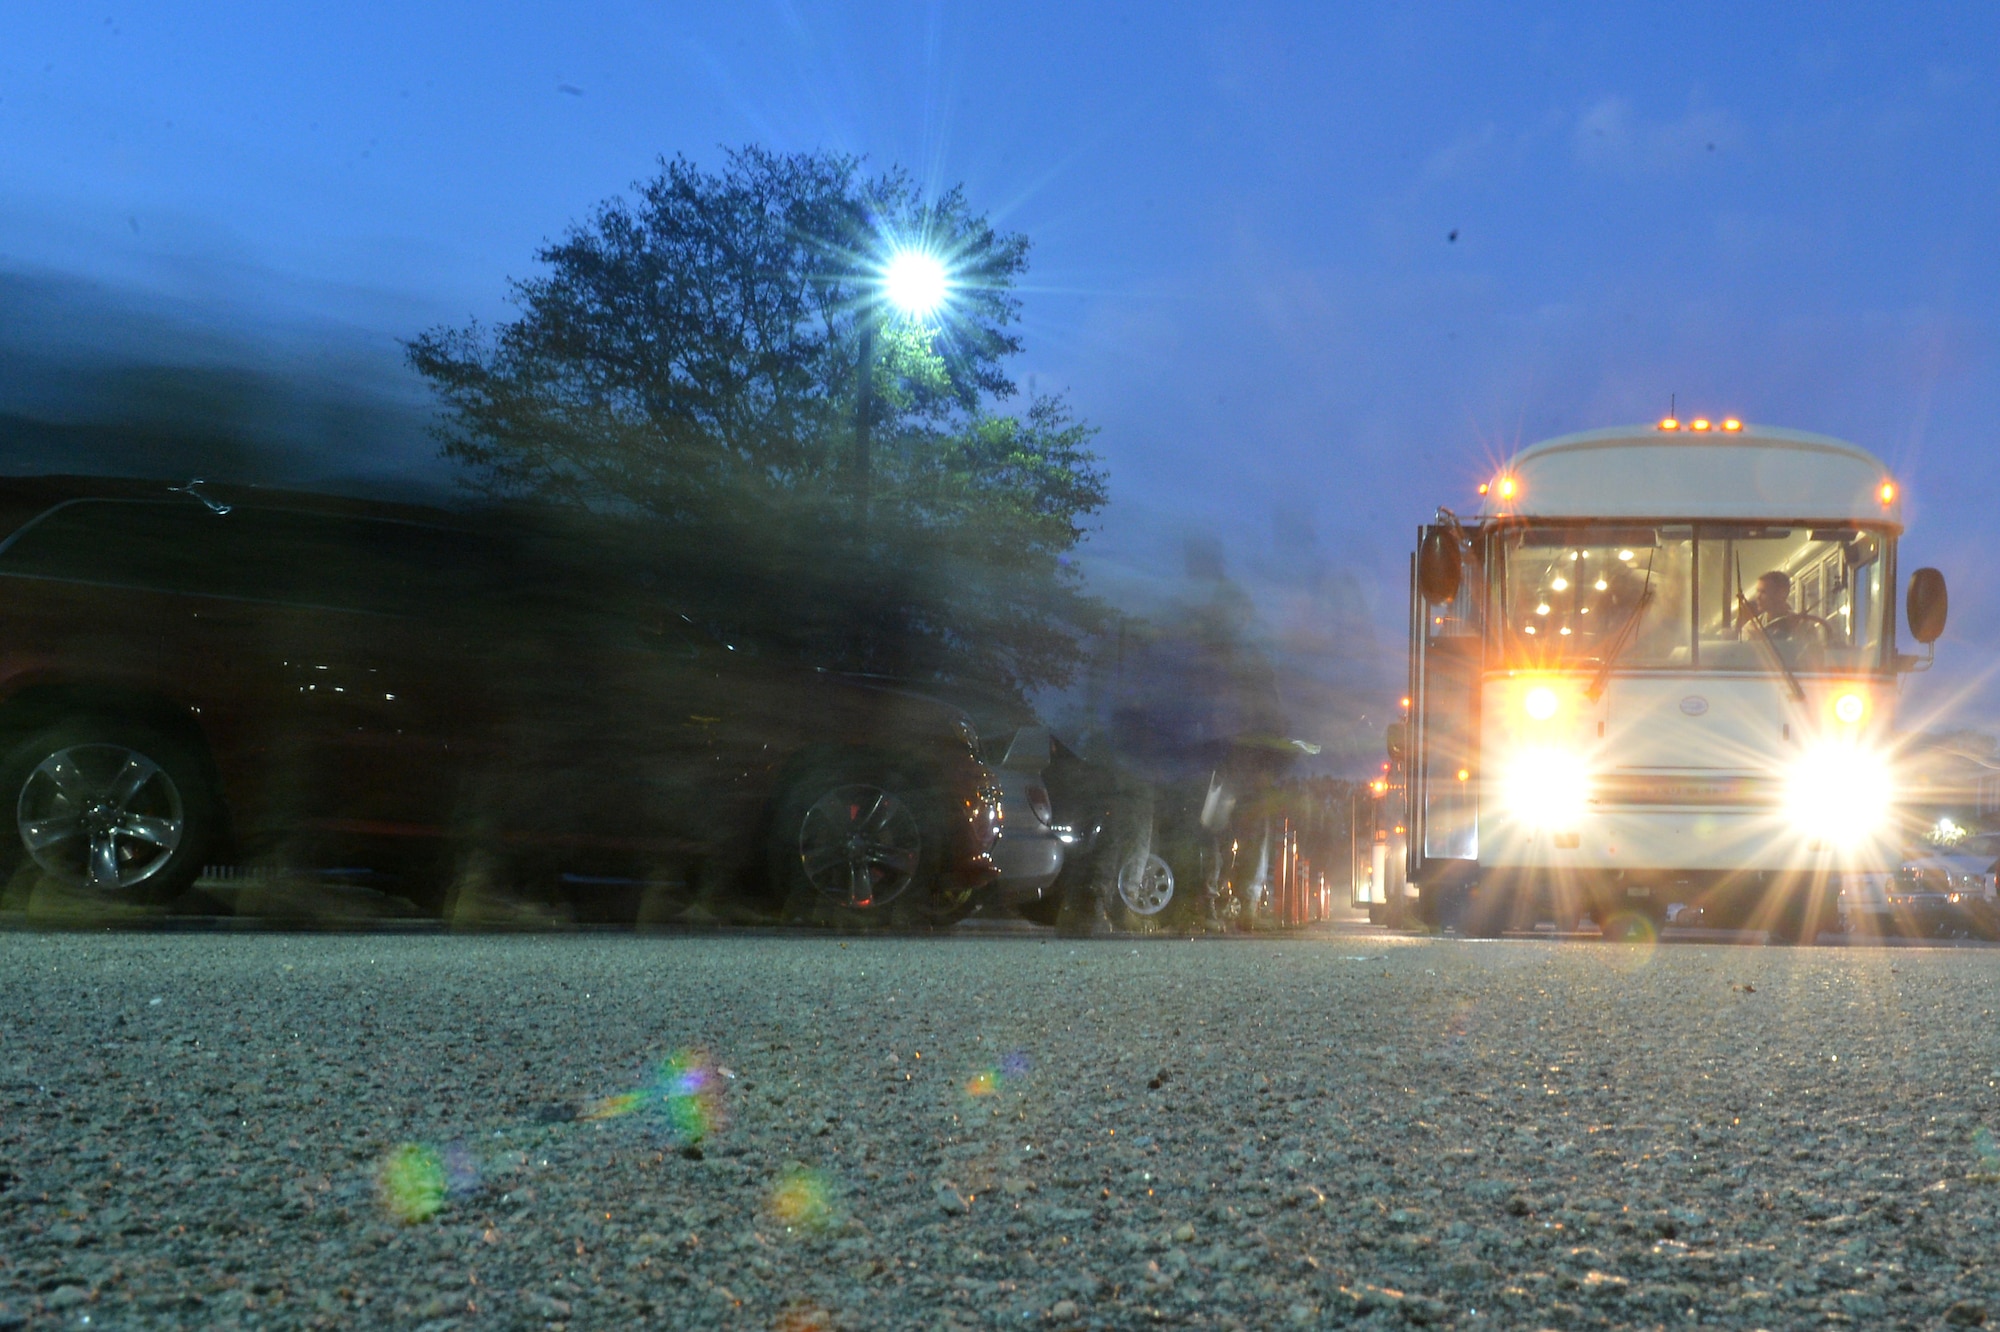 U.S. Airmen assigned to the 20th Fighter Wing board a bus to the Chandler Deployment Processing Center at Shaw Air Force Base, S.C., Oct. 21, 2016. The Airmen were transported to the DPC to depart Shaw for a deployment. (U.S. Air Force photo by Airman 1st Class Christopher Maldonado)